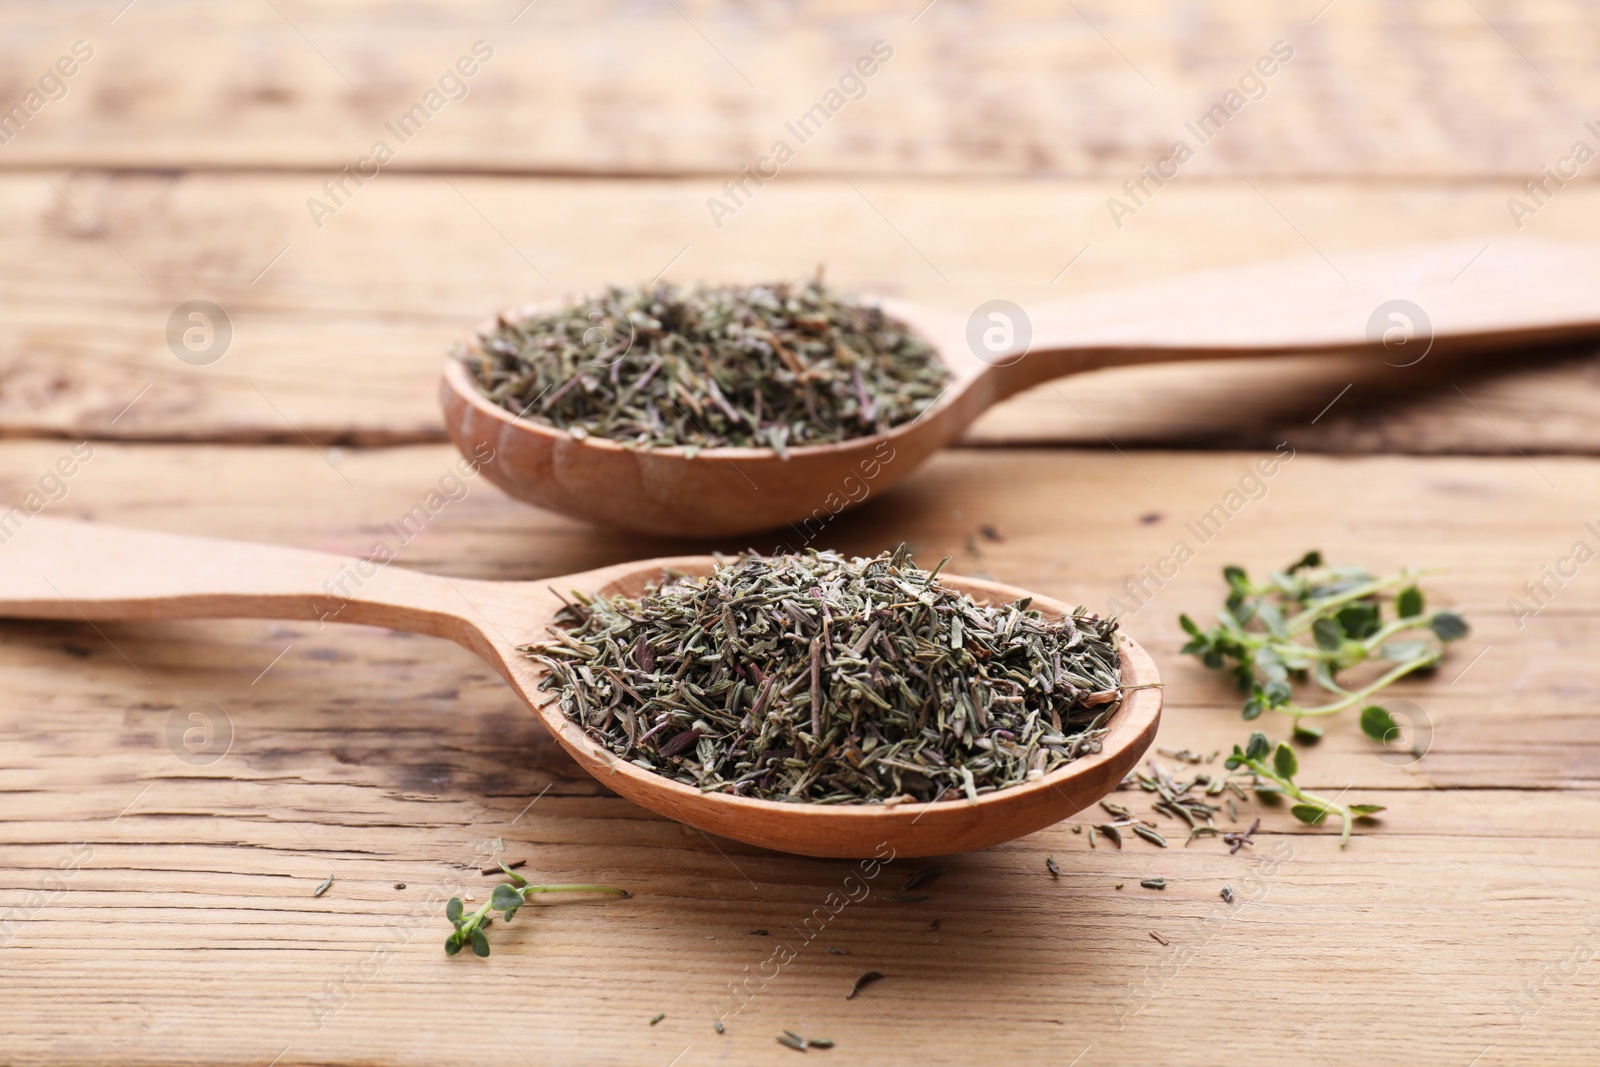 Photo of Spoons with dried and fresh thyme on wooden table, closeup